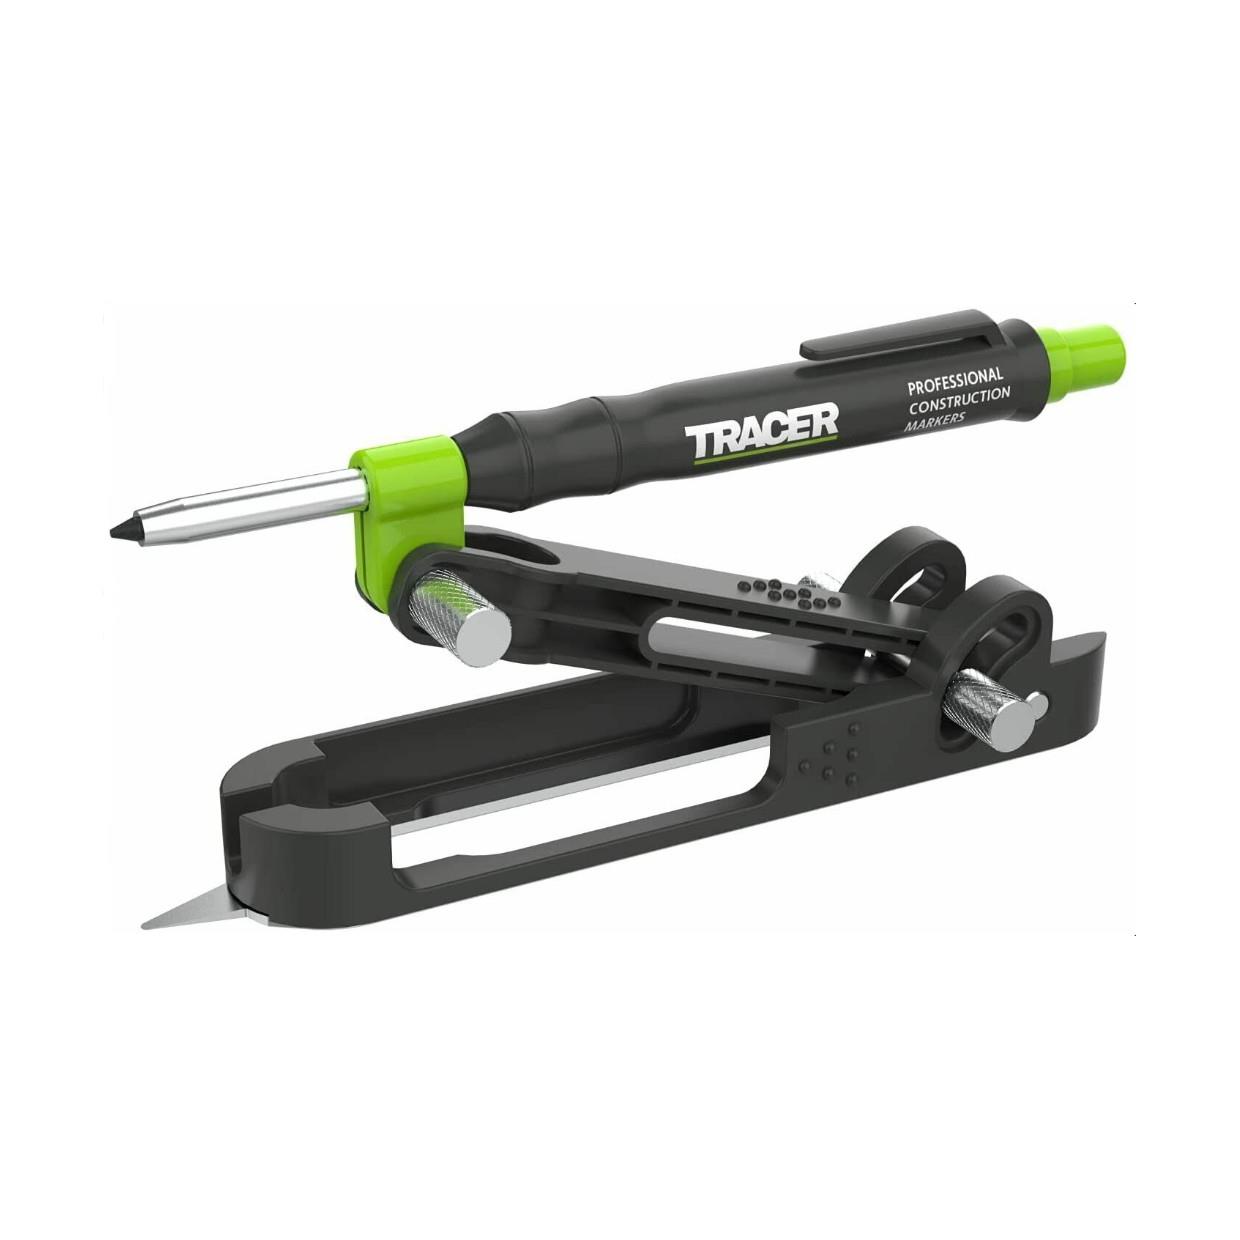 Tracer APST2 Proscibe Kit; Inlcudes Deep Hole Pencil Marker